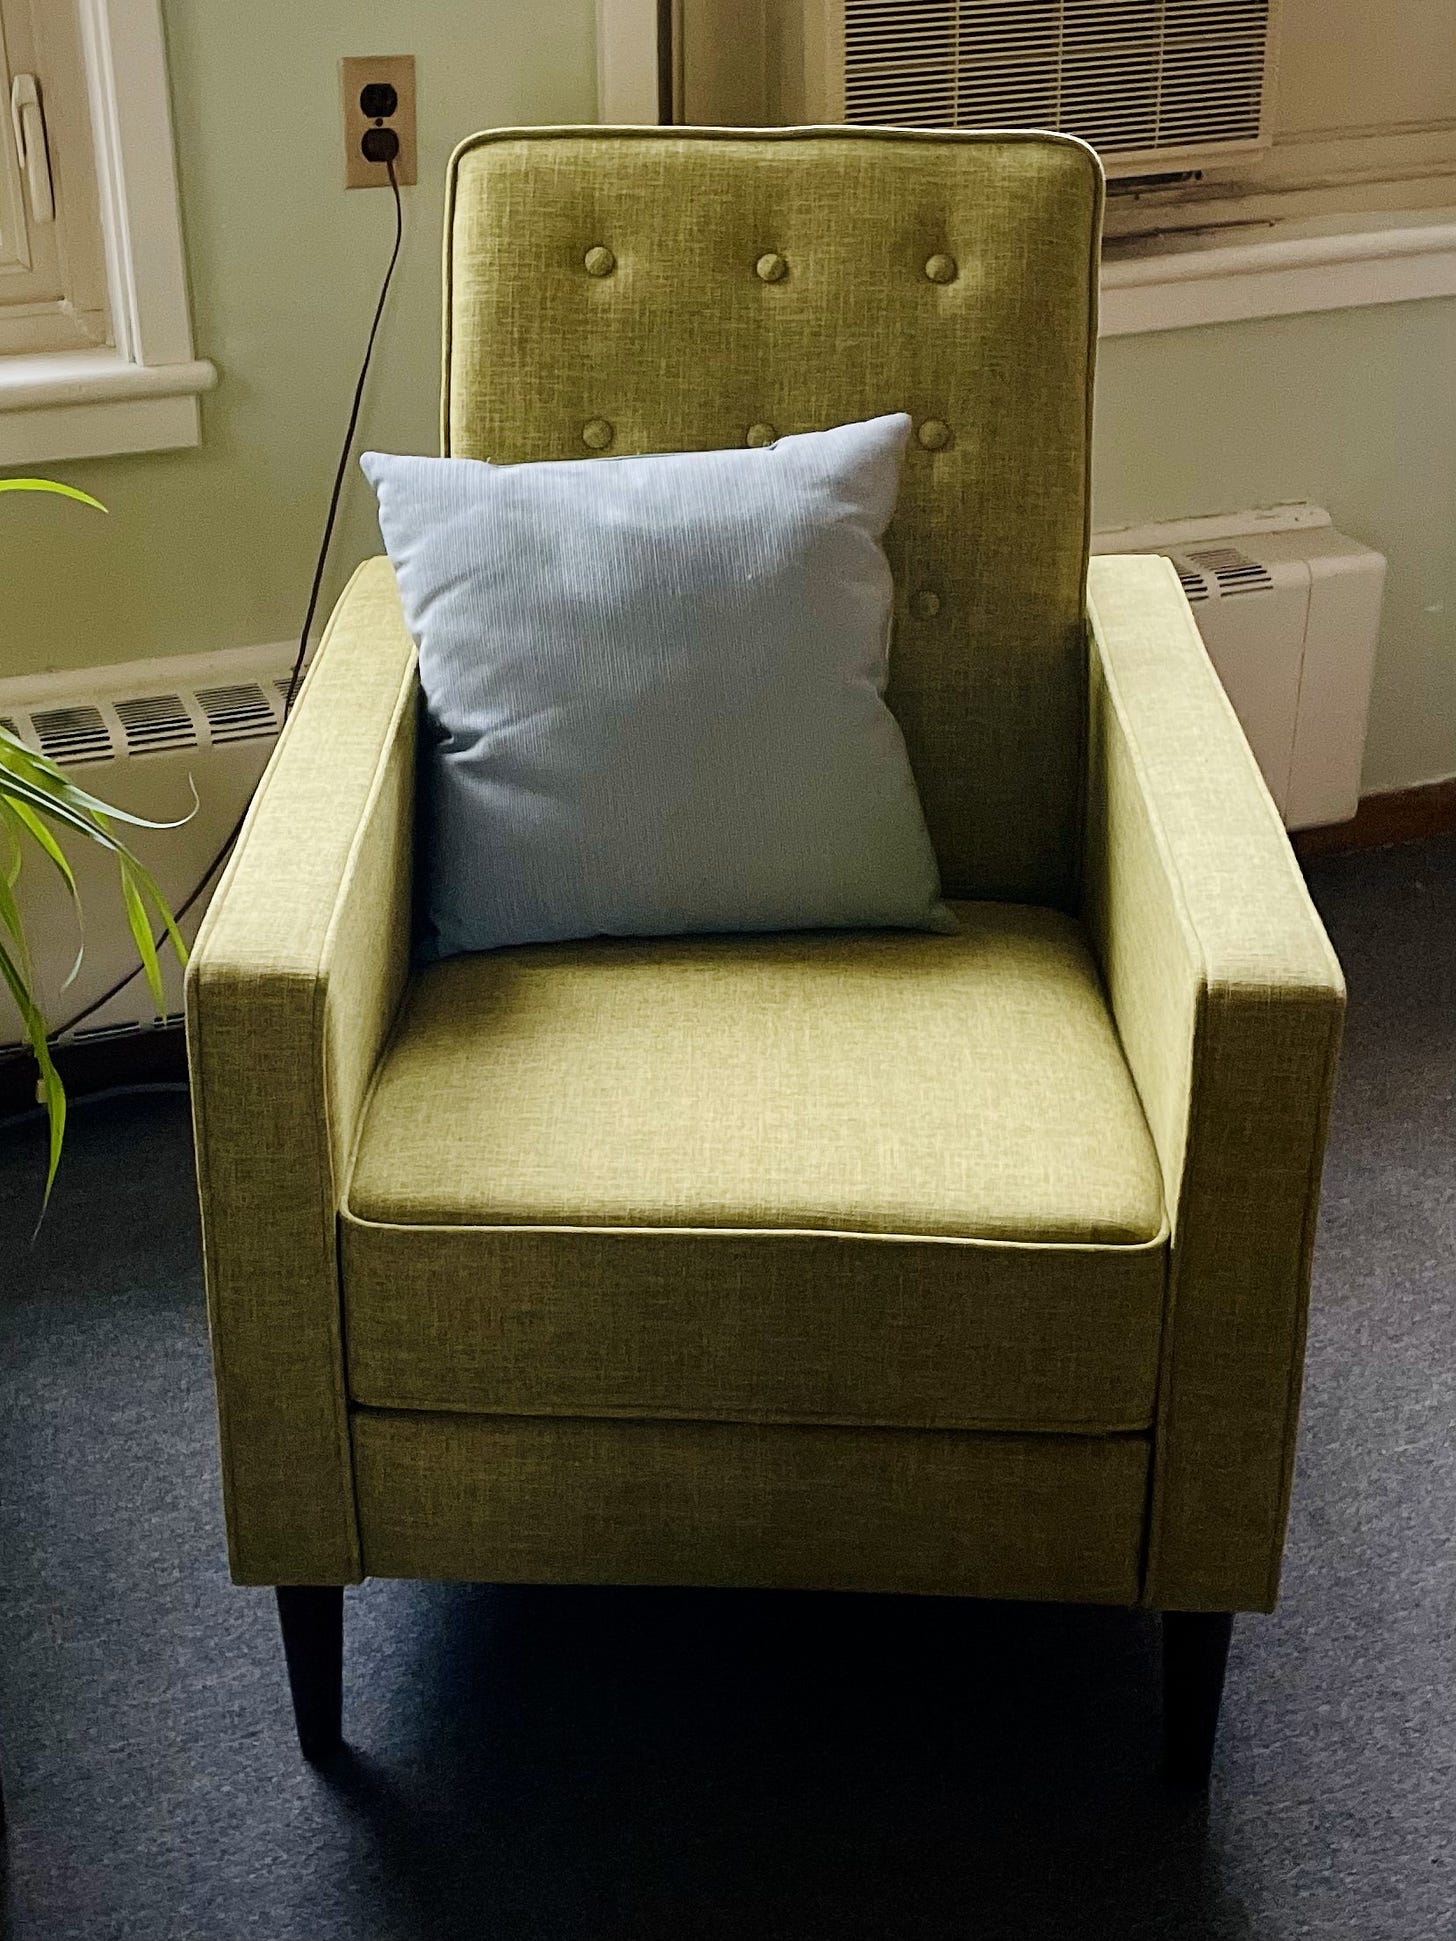 A green chair with a light blue pillow on in with tufted buttons.